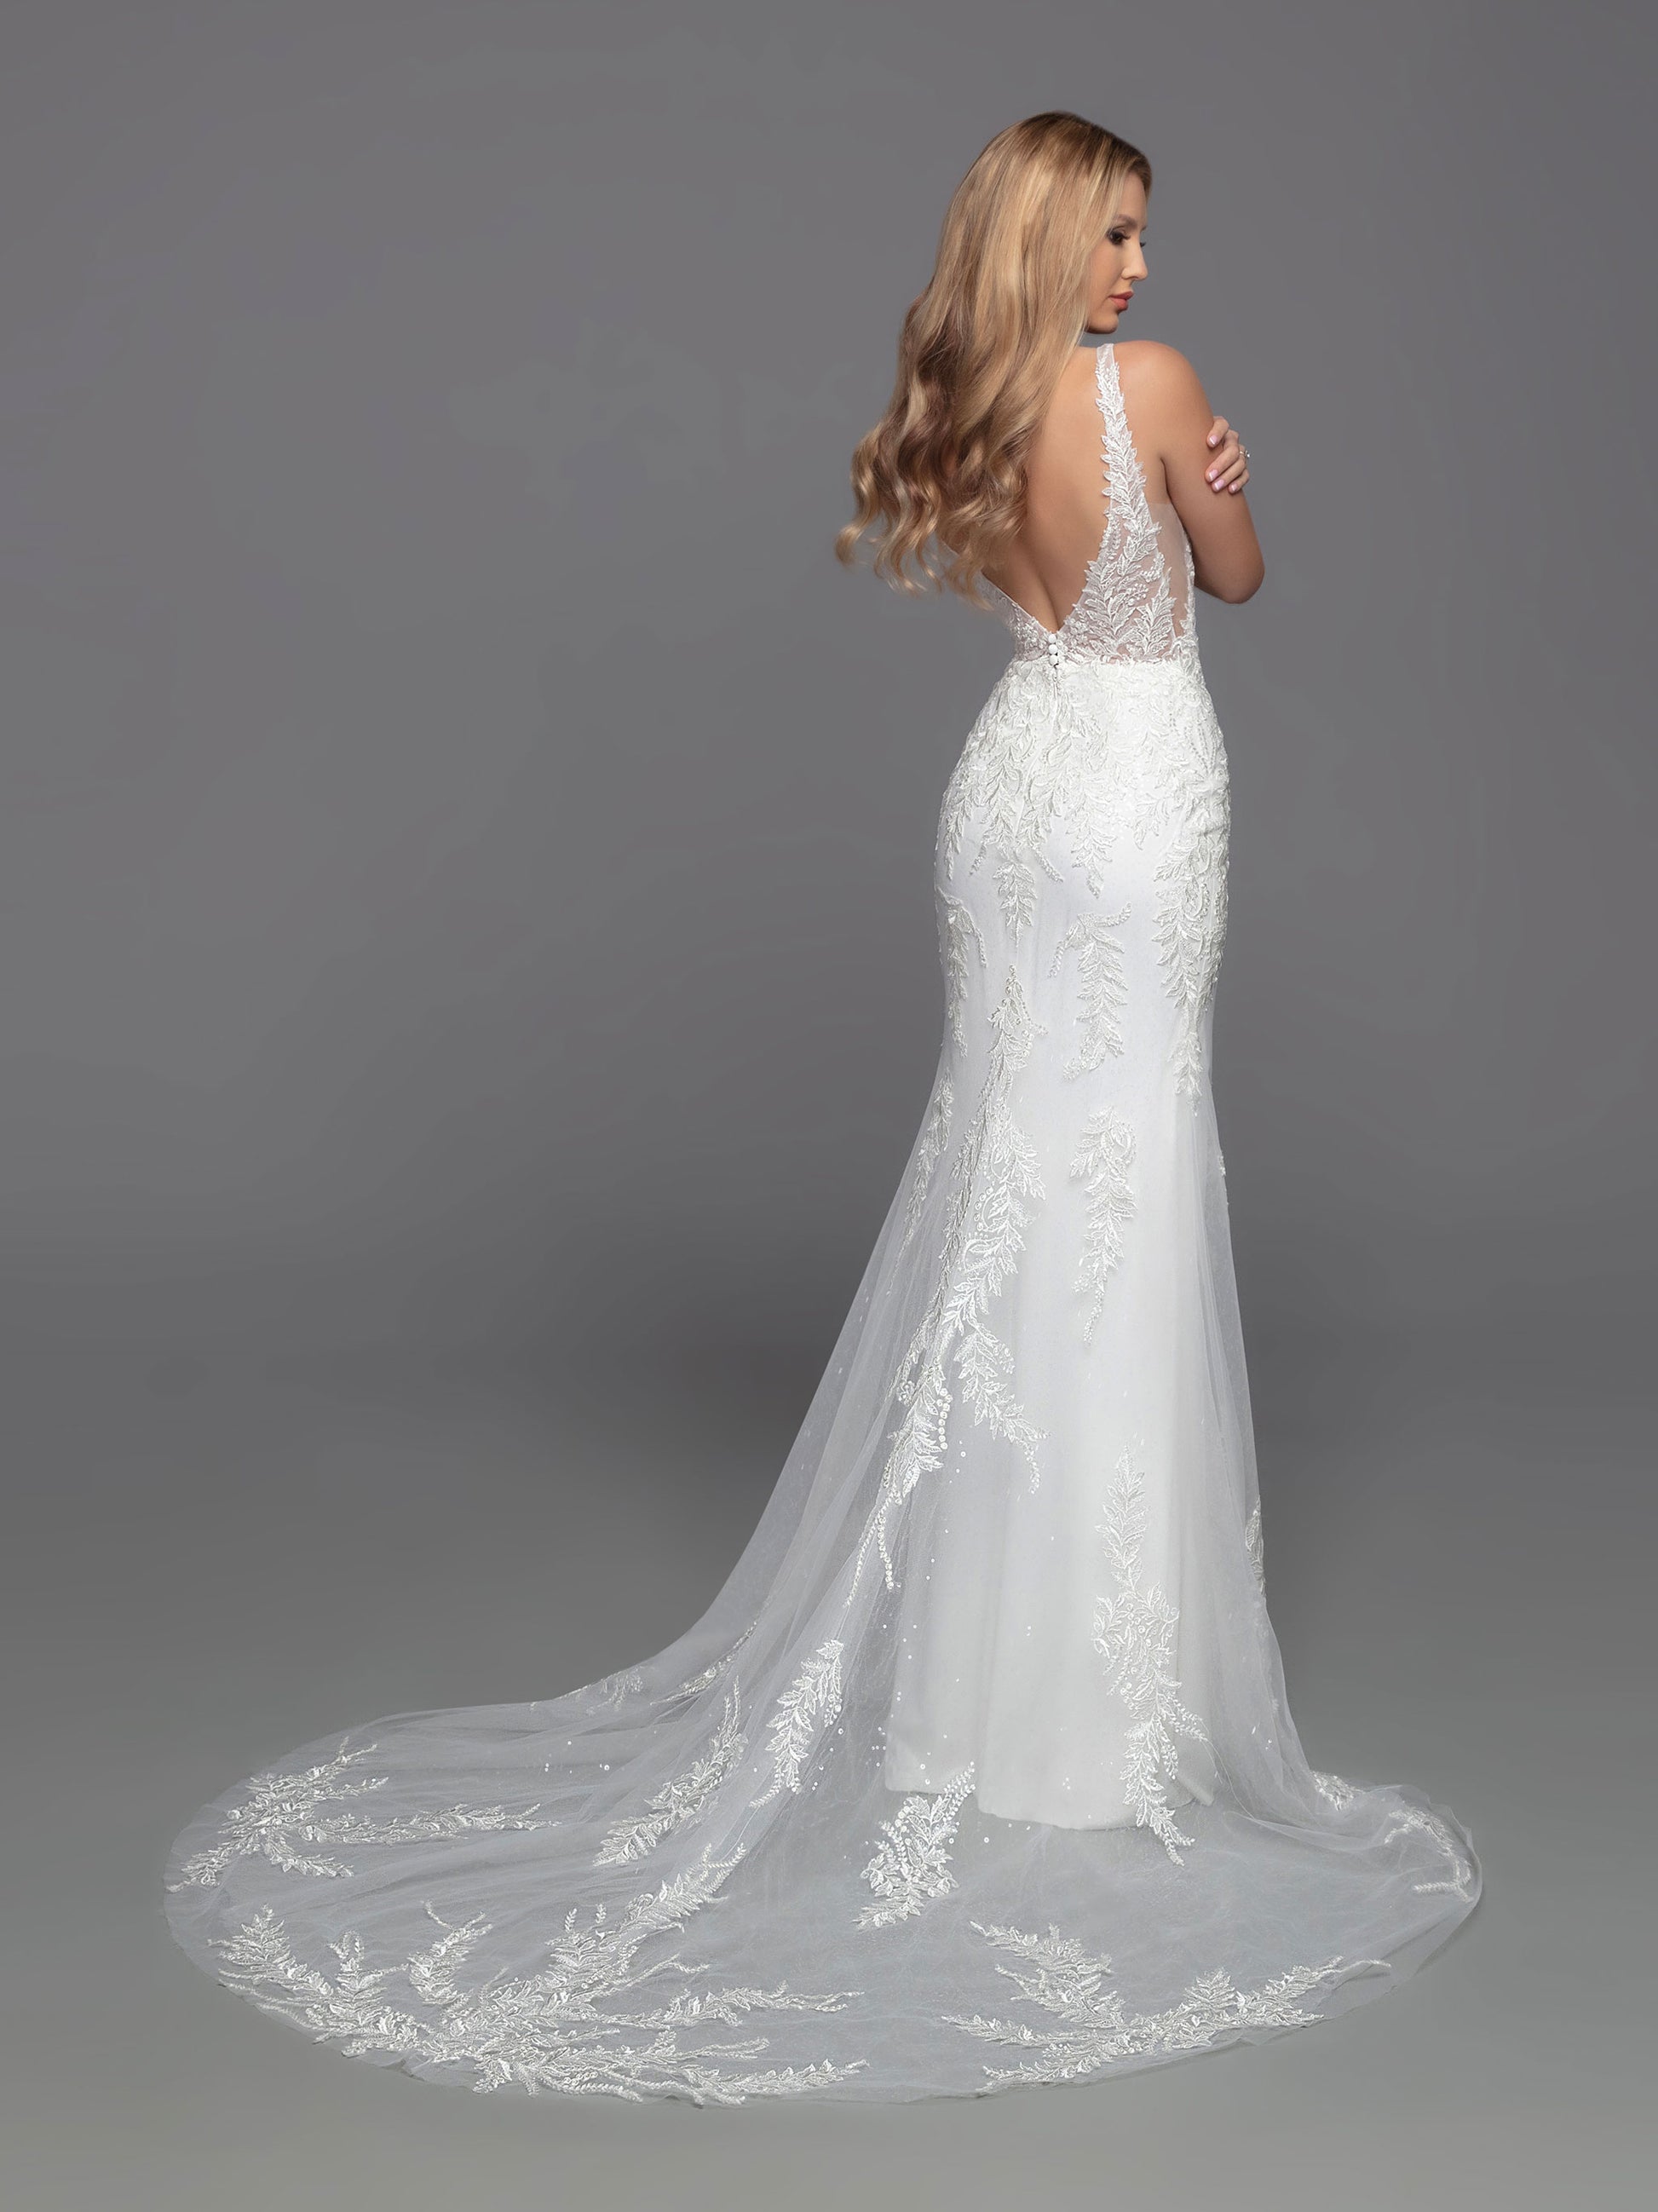 This Davinci Bridal 50822 wedding dress offers an alluring mix of modern elegance and classic sophistication. The sheer lace bodice is perfectly complemented by the beaded sequin and lace applique accents on the floor-length skirt lining and sheer chapel train. The deep V-neck & back and sheer side panels flatter any figure. Make an unforgettable statement on your special day.  Sizes: 2-20  Colors: Ivory